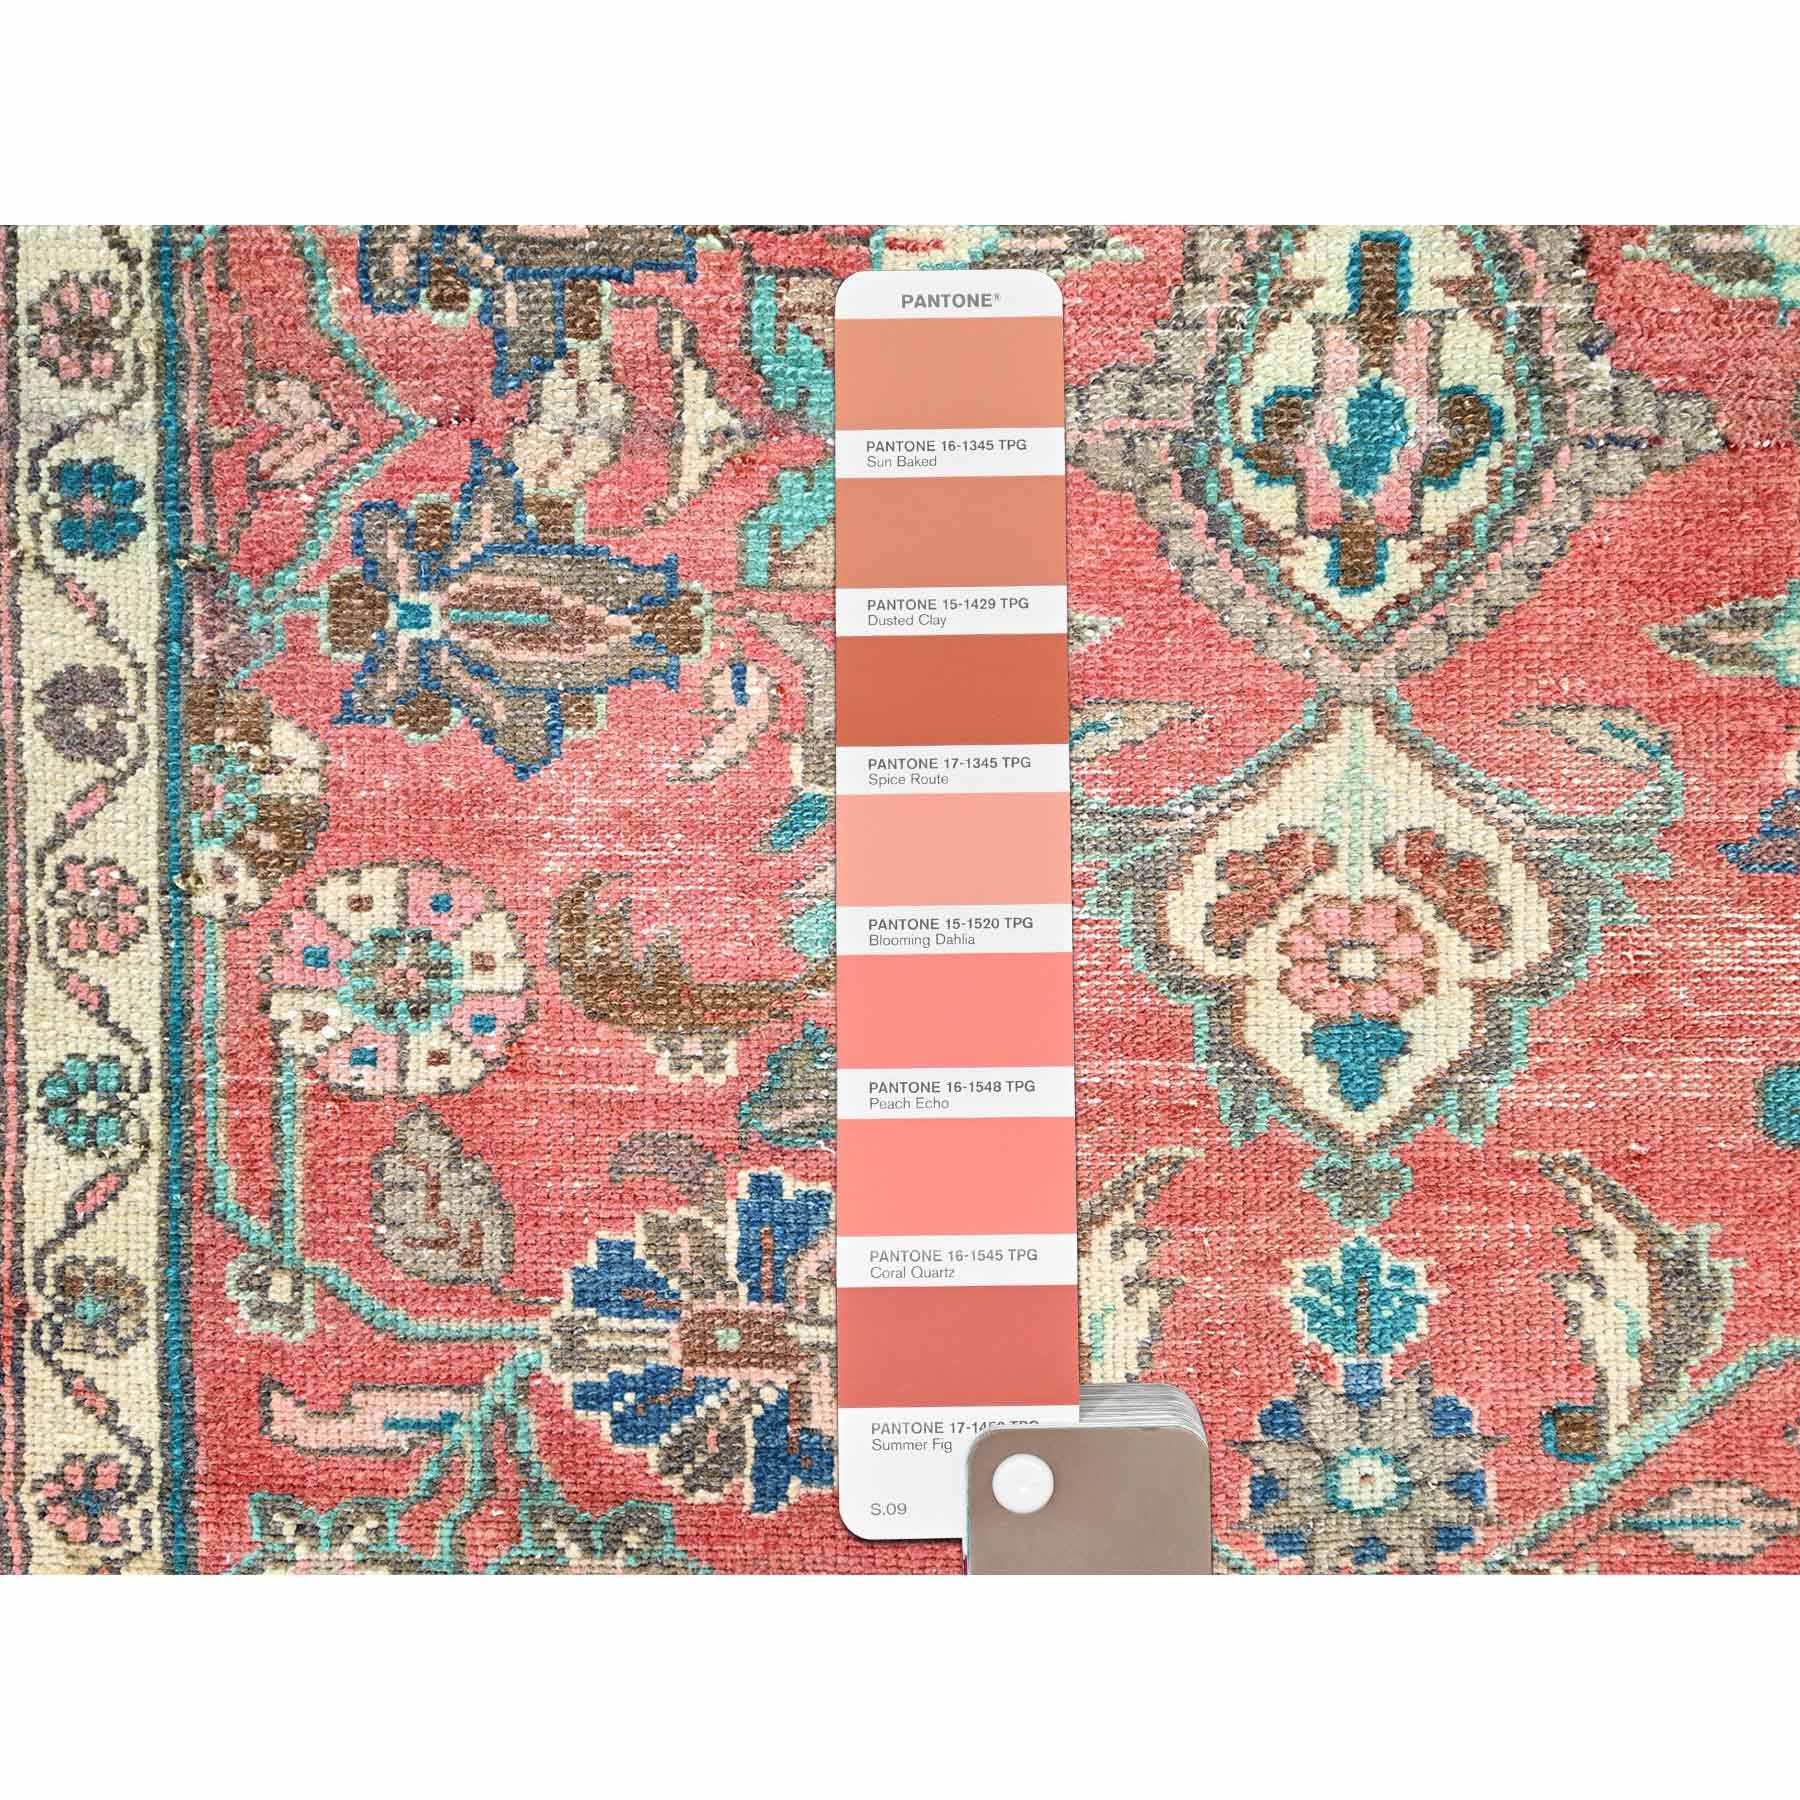 Overdyed-Vintage-Hand-Knotted-Rug-429795